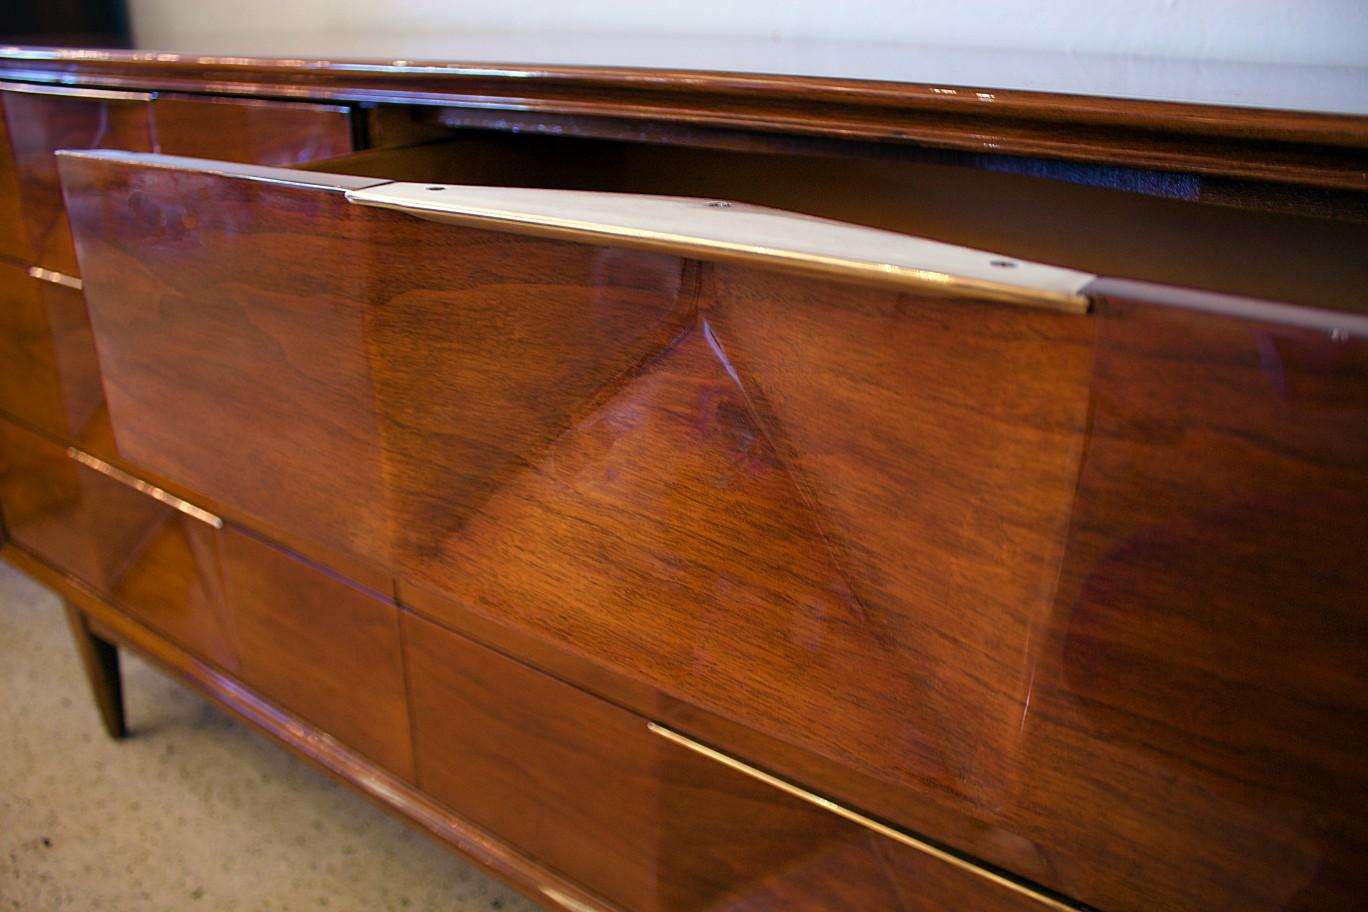 Mid-20th Century American Modern Walnut and Brass Chest of Drawers, American of Martinsville